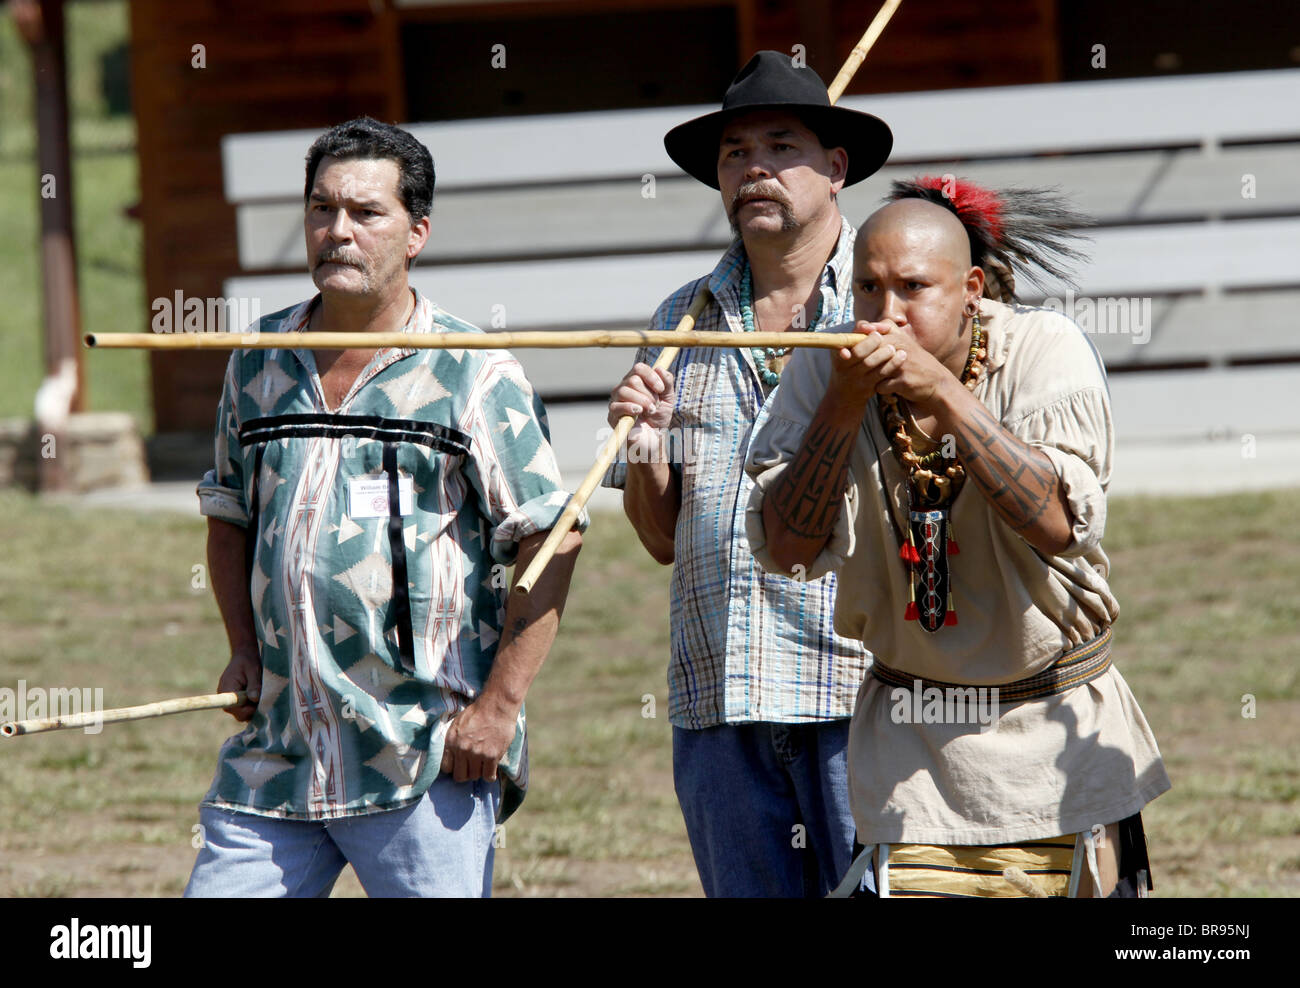 A Cherokee man, member of the Warriors of AniKituhwa group, blows a dart  during a blowgun contest Stock Photo - Alamy